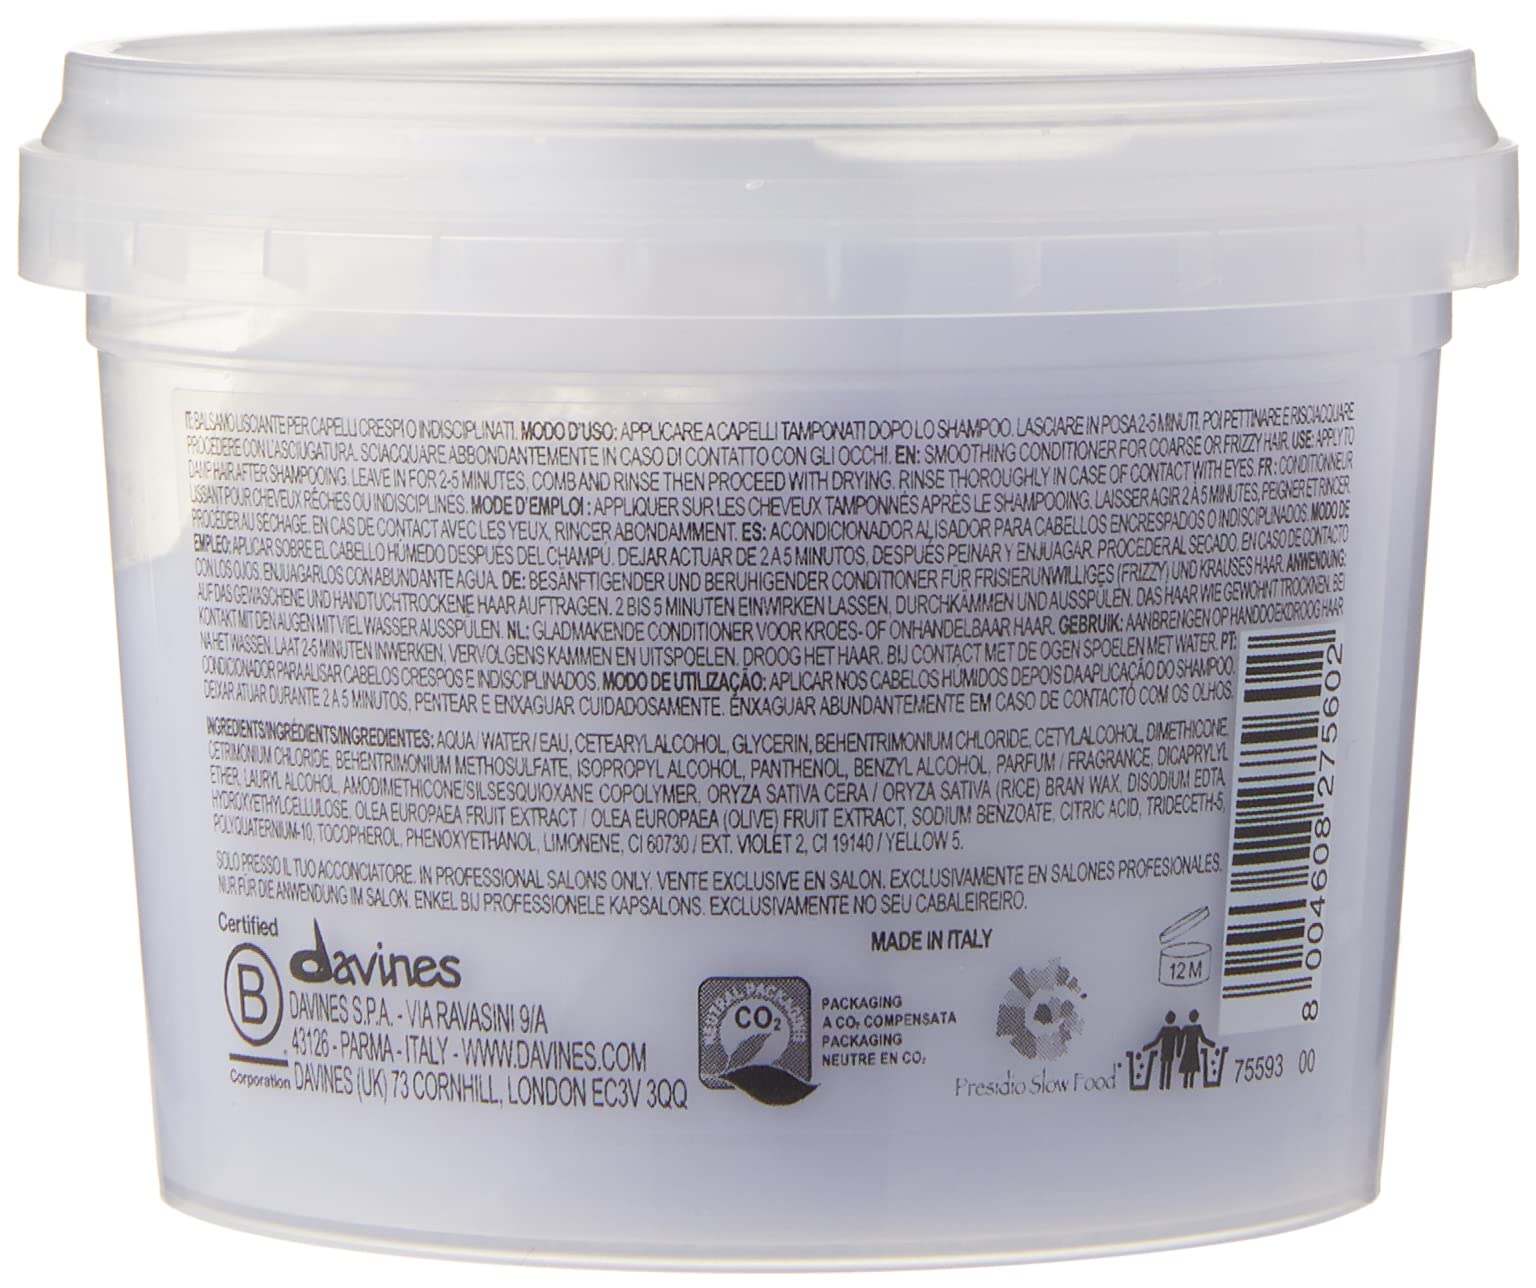 Davines LOVE Smoothing Conditioner, Smoothing Formula for Frizzy or Coarse Hair, Soften and Nourish